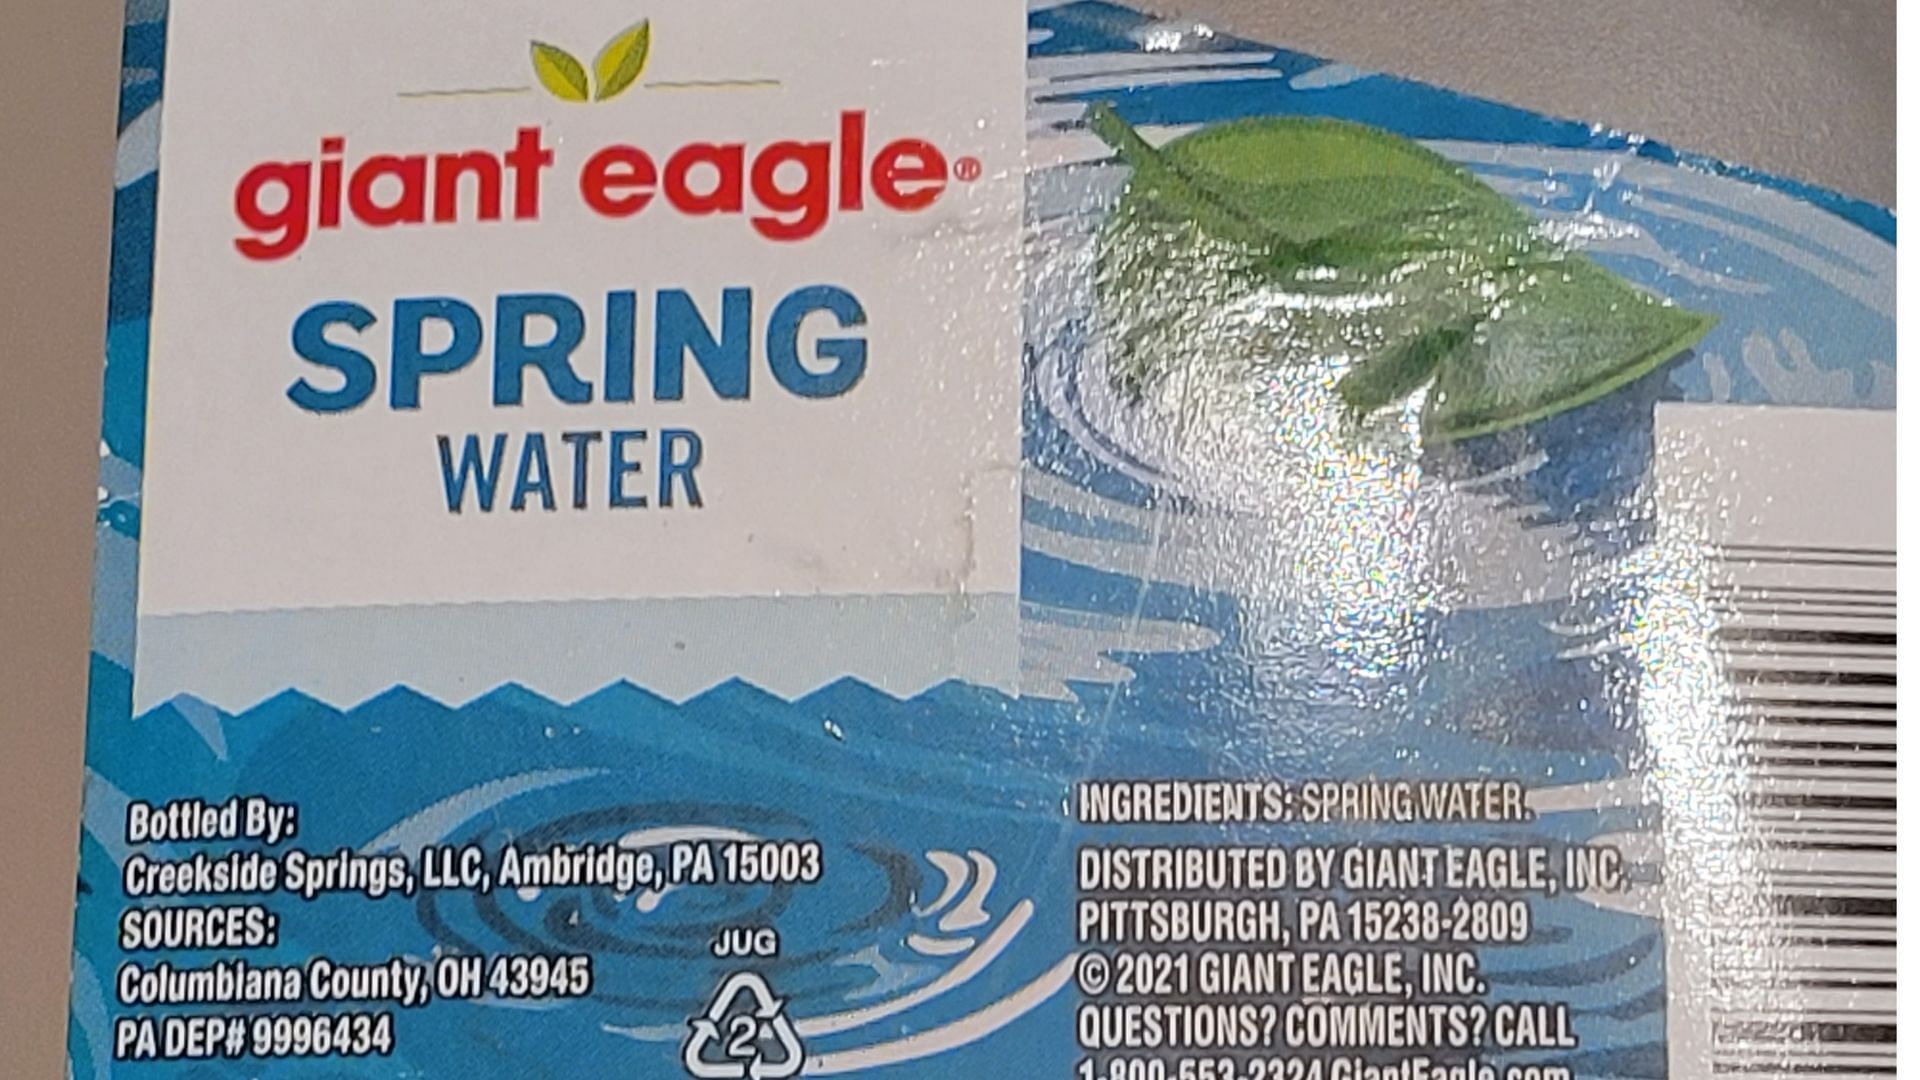 The discontinued bottles of water produced by Creekside Springs (Image via Giant Eagle)